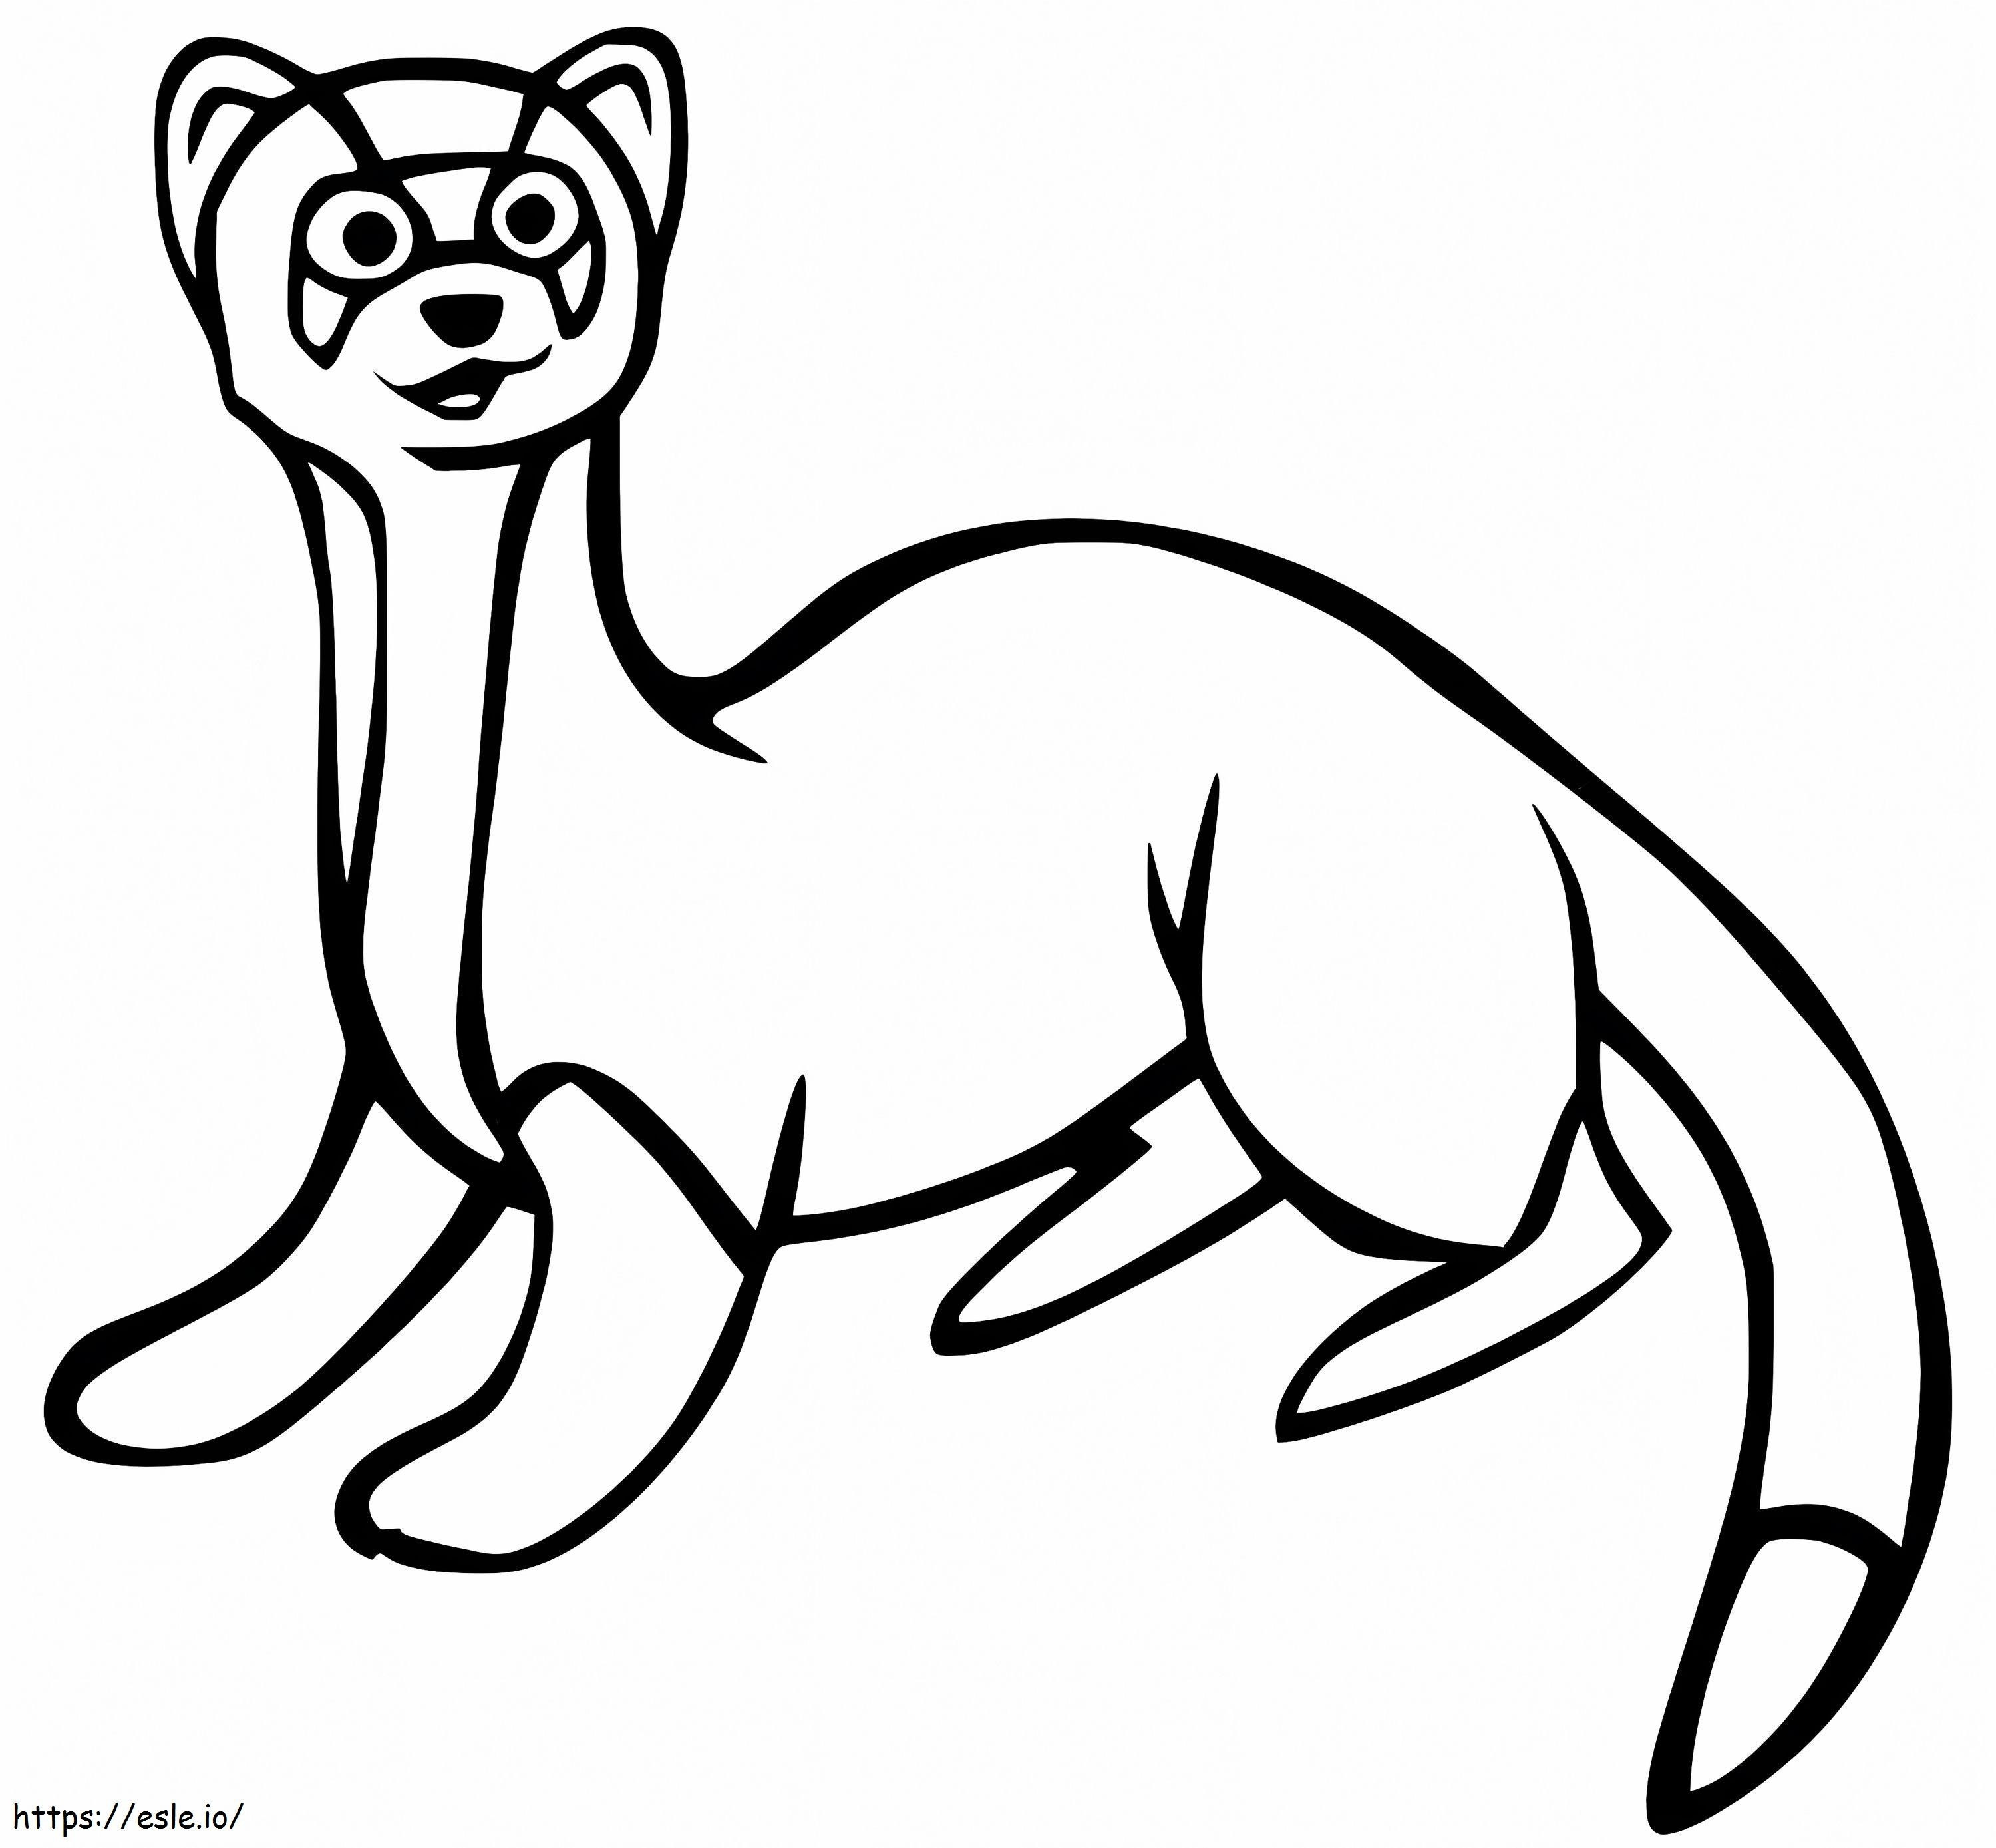 Ferret 6 coloring page